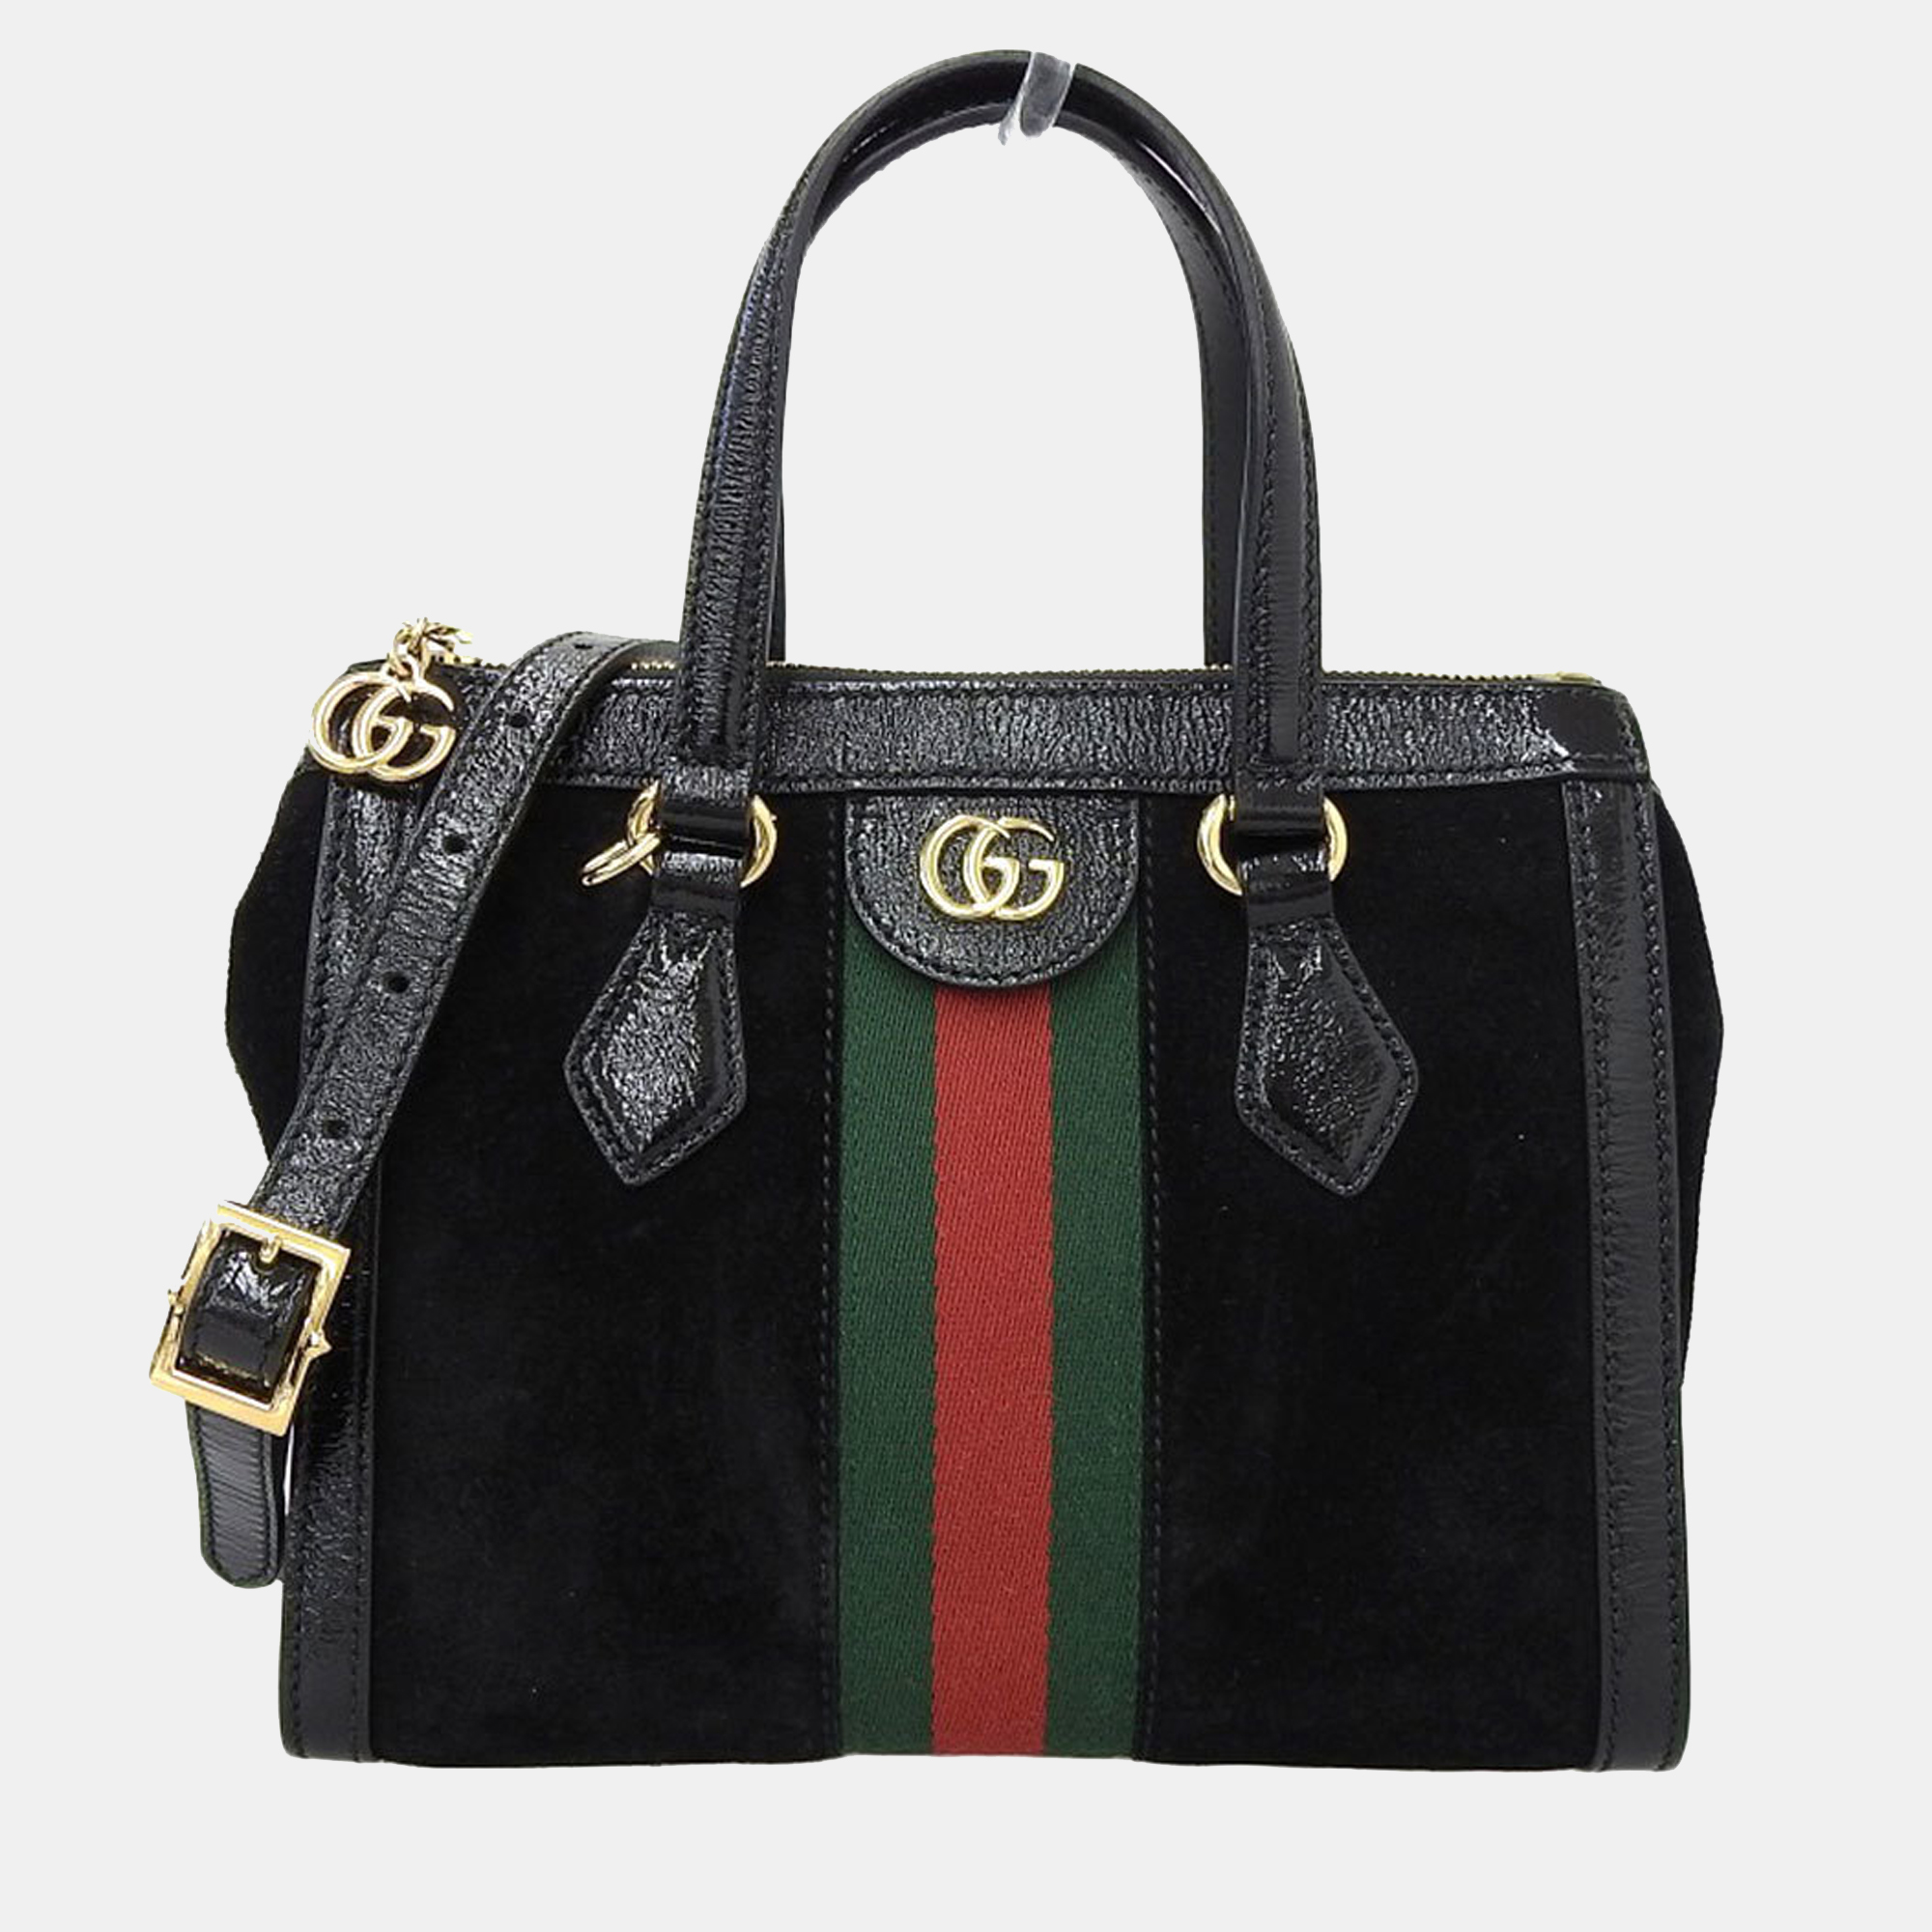 Gucci black leather and suede ophidia tote bag